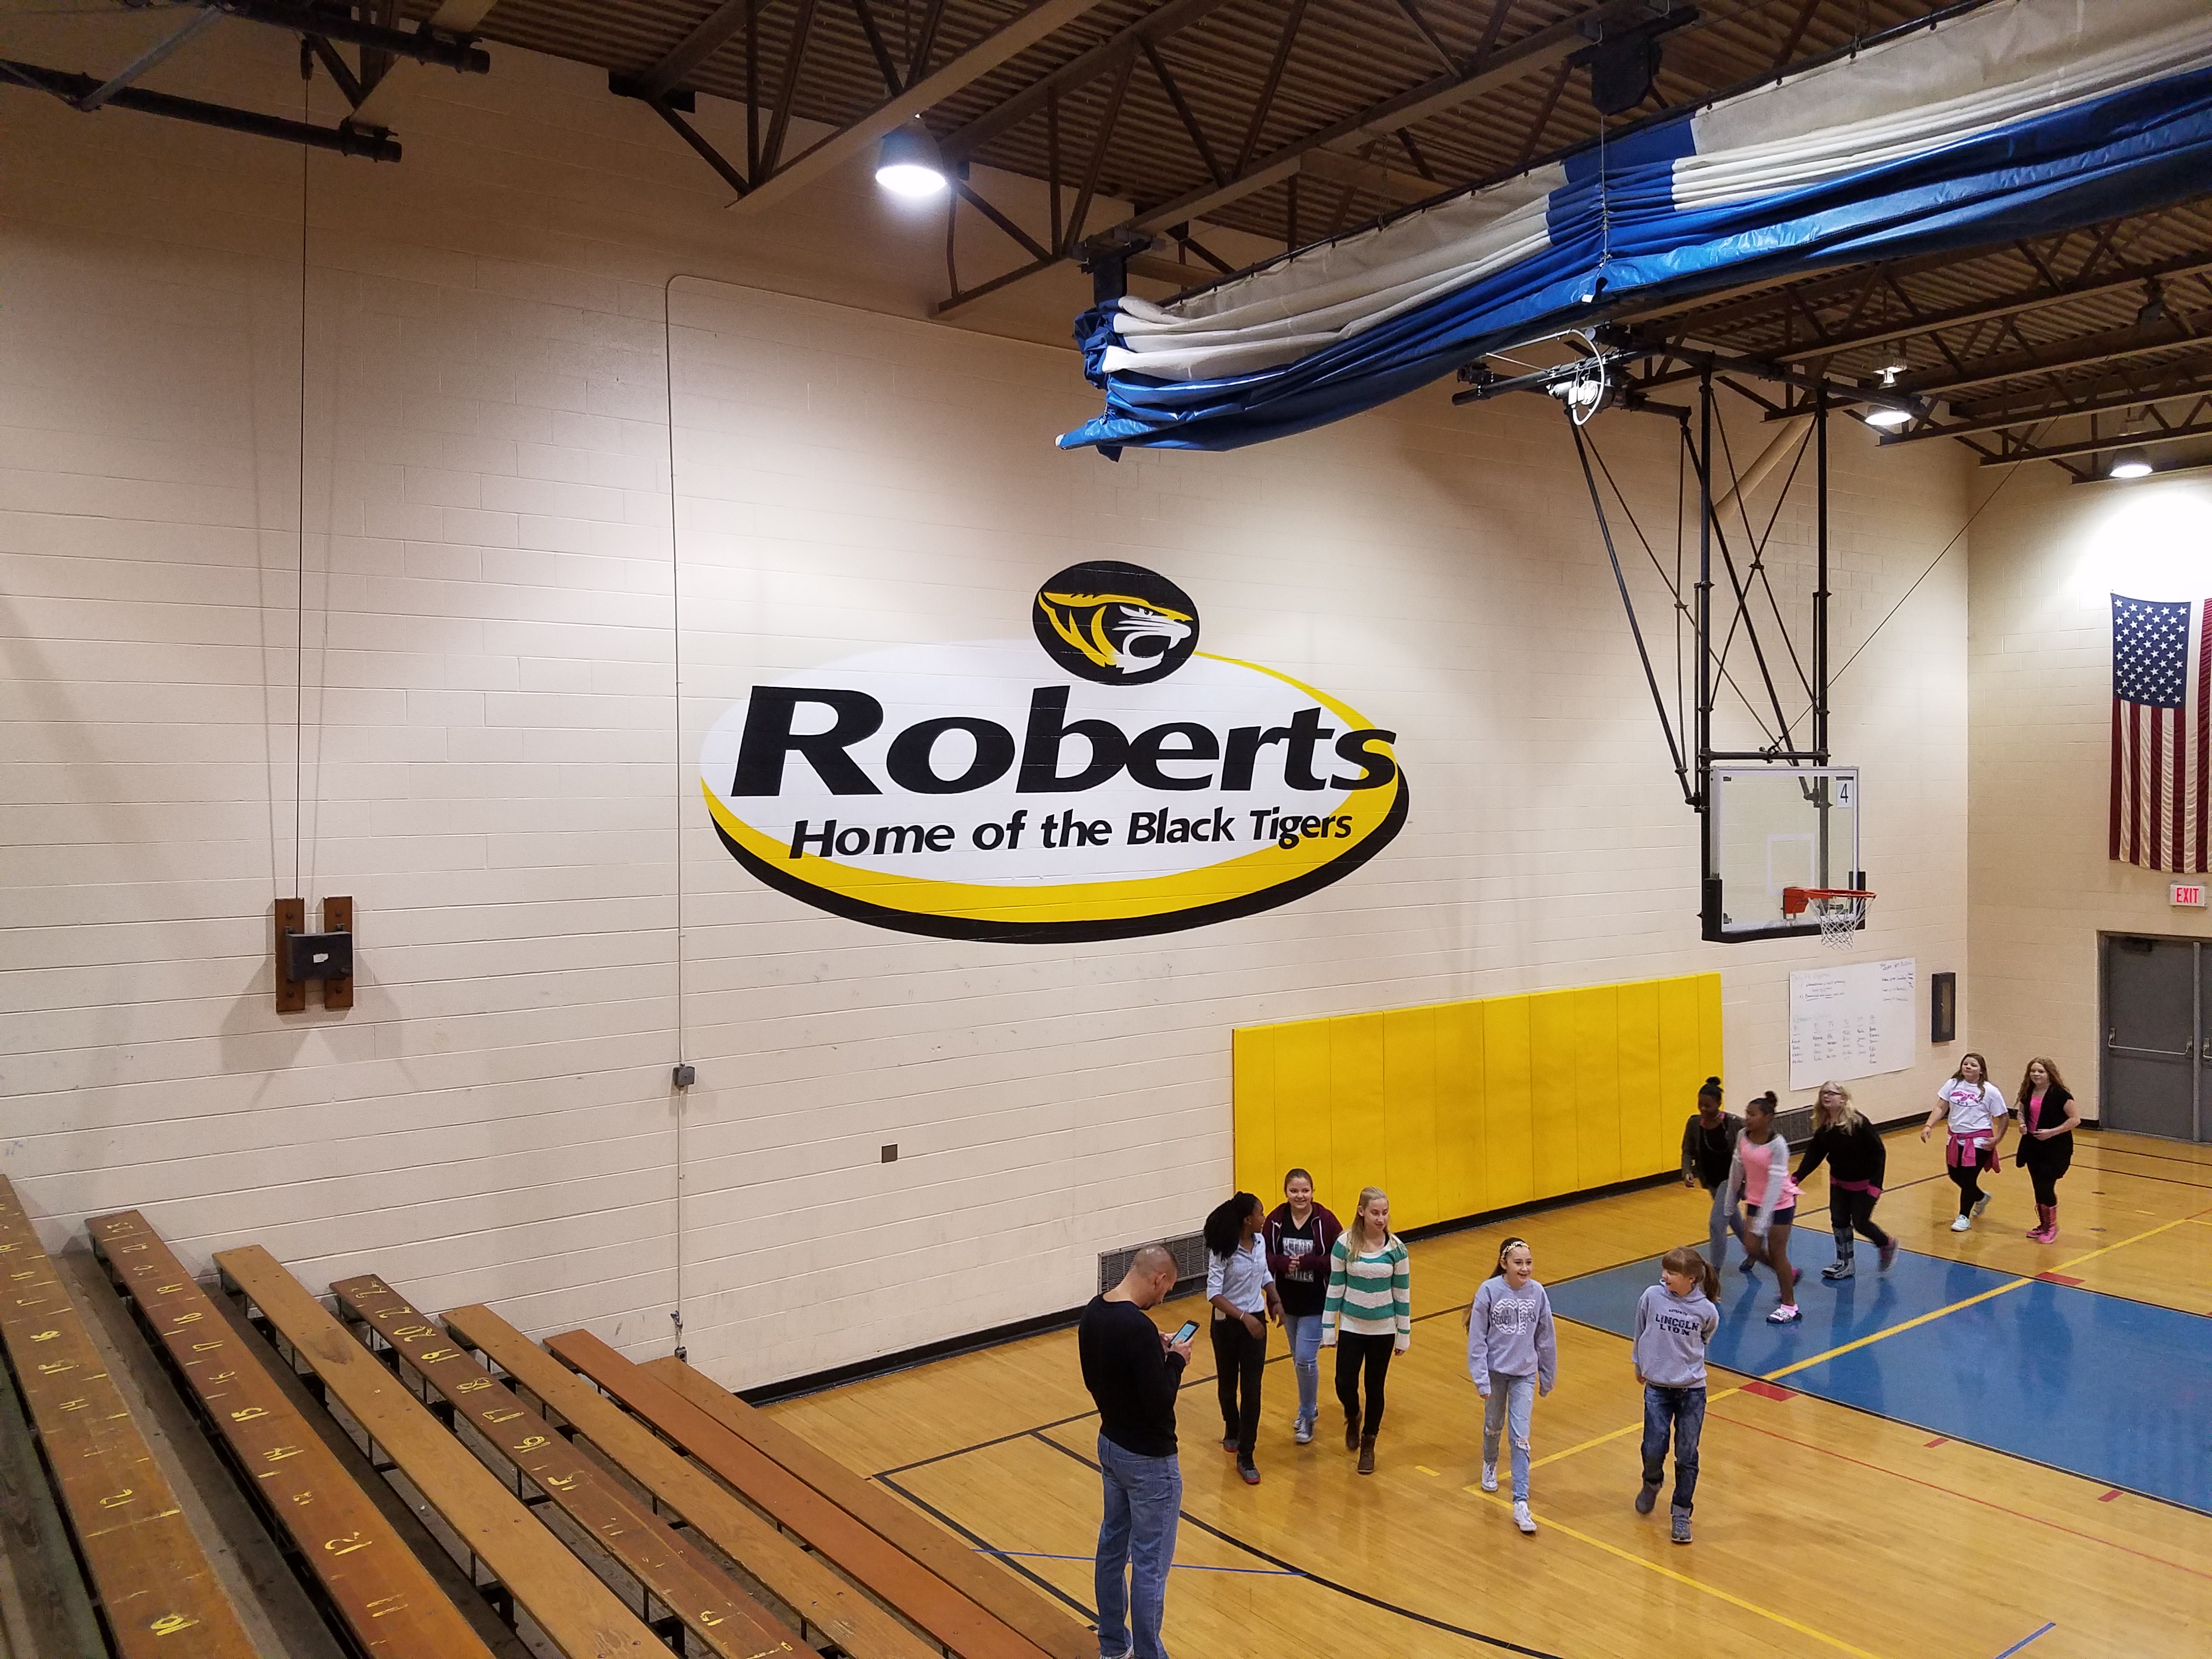 bill roberts middle school tour